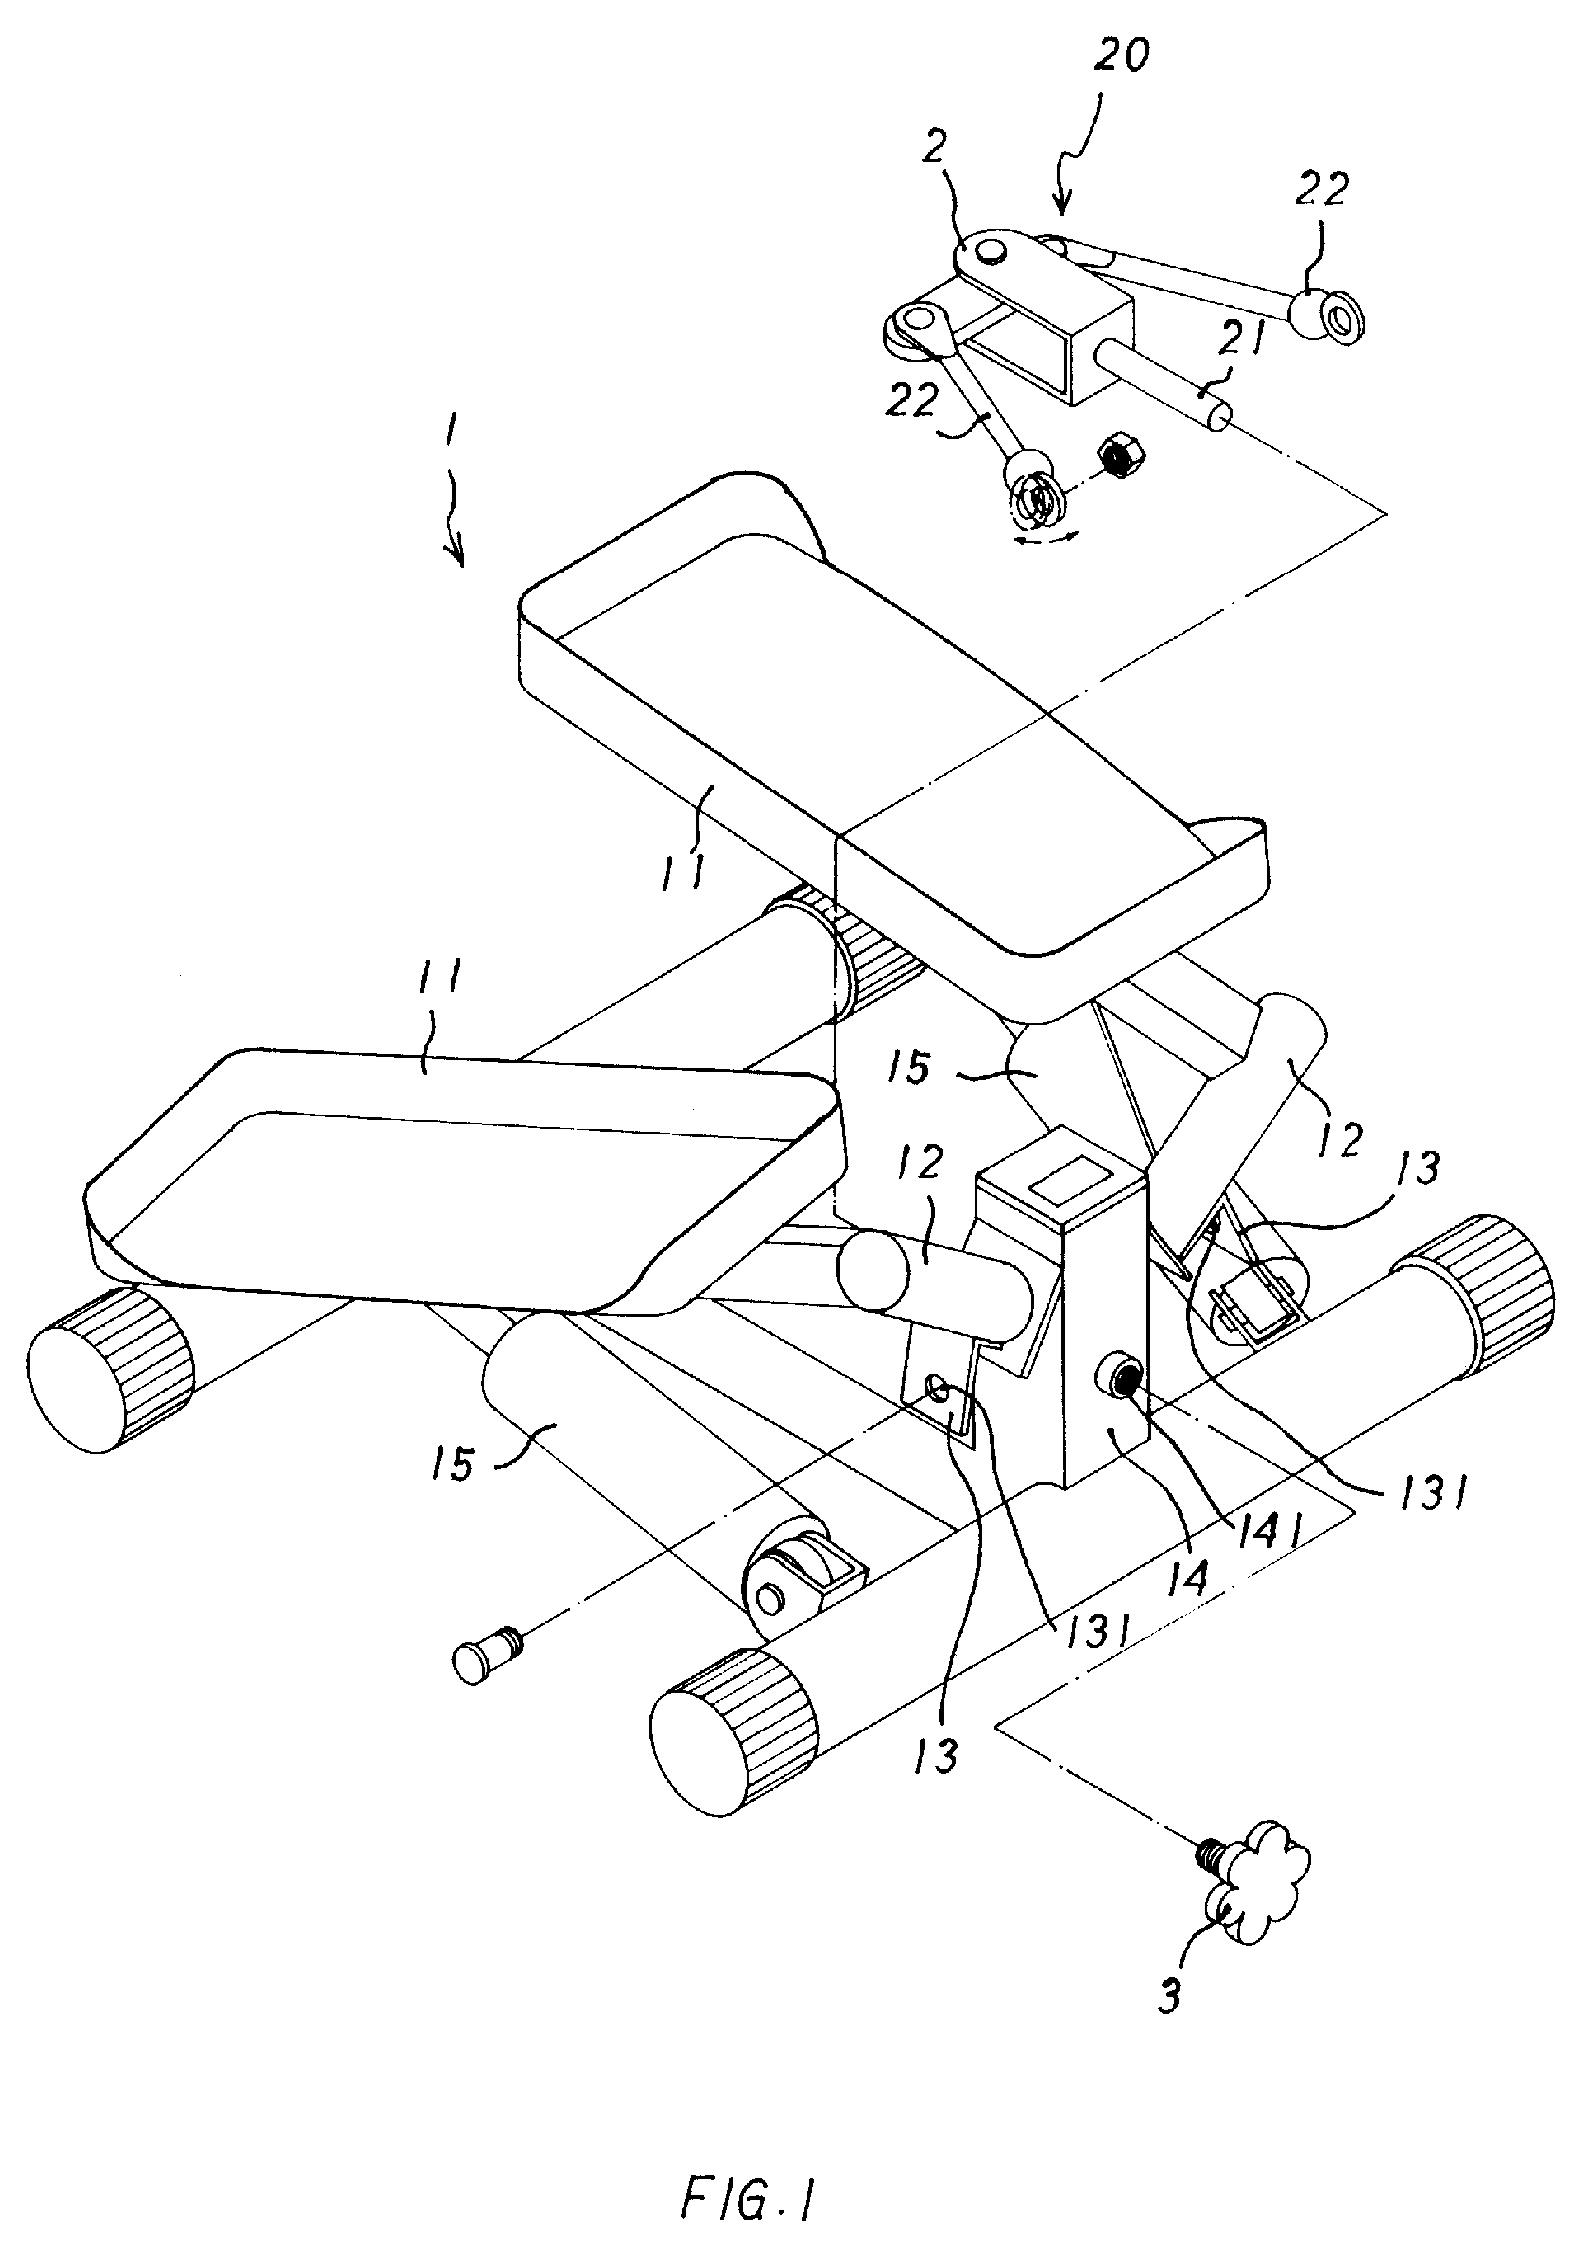 Moving length adjustment device of a treading trainer